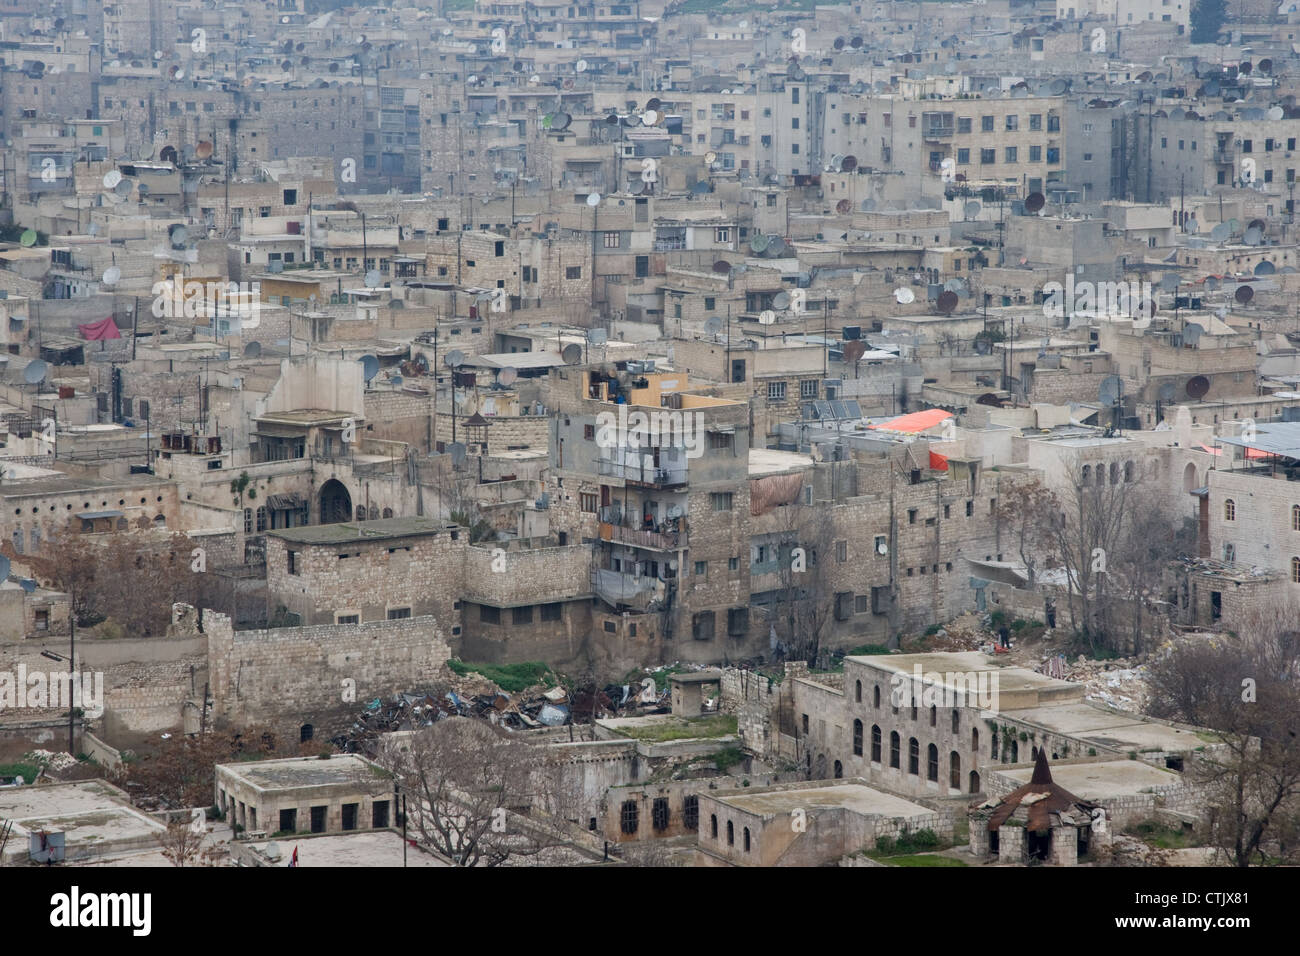 View of houses in the city of Aleppo, in Syria, from the Citadel Stock Photo